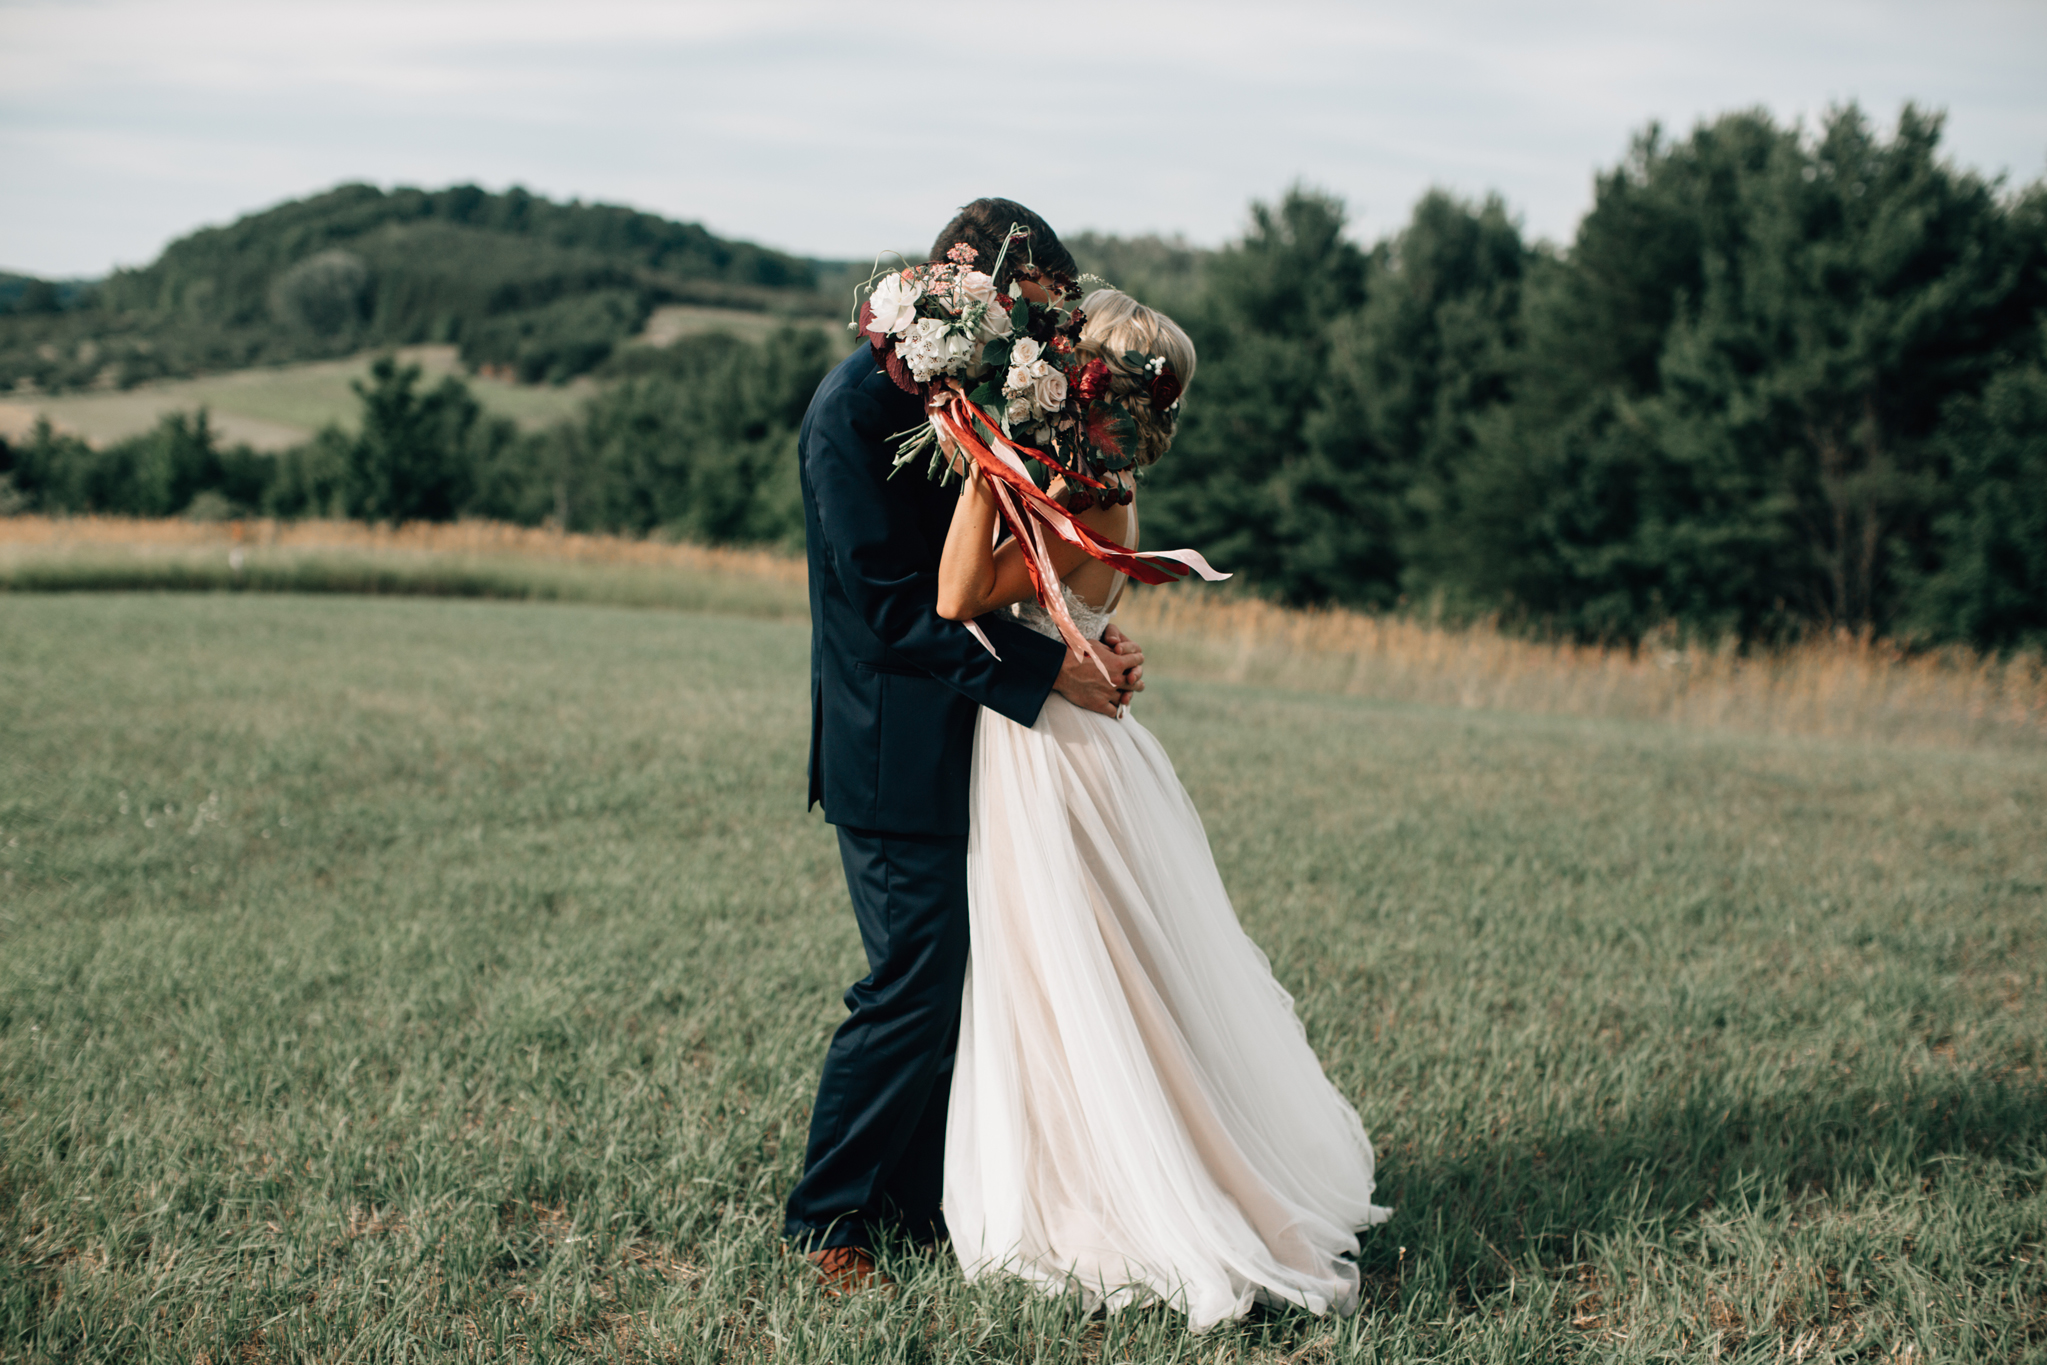 Traverse City Wedding | The Day's Design | Bethany Small Photography